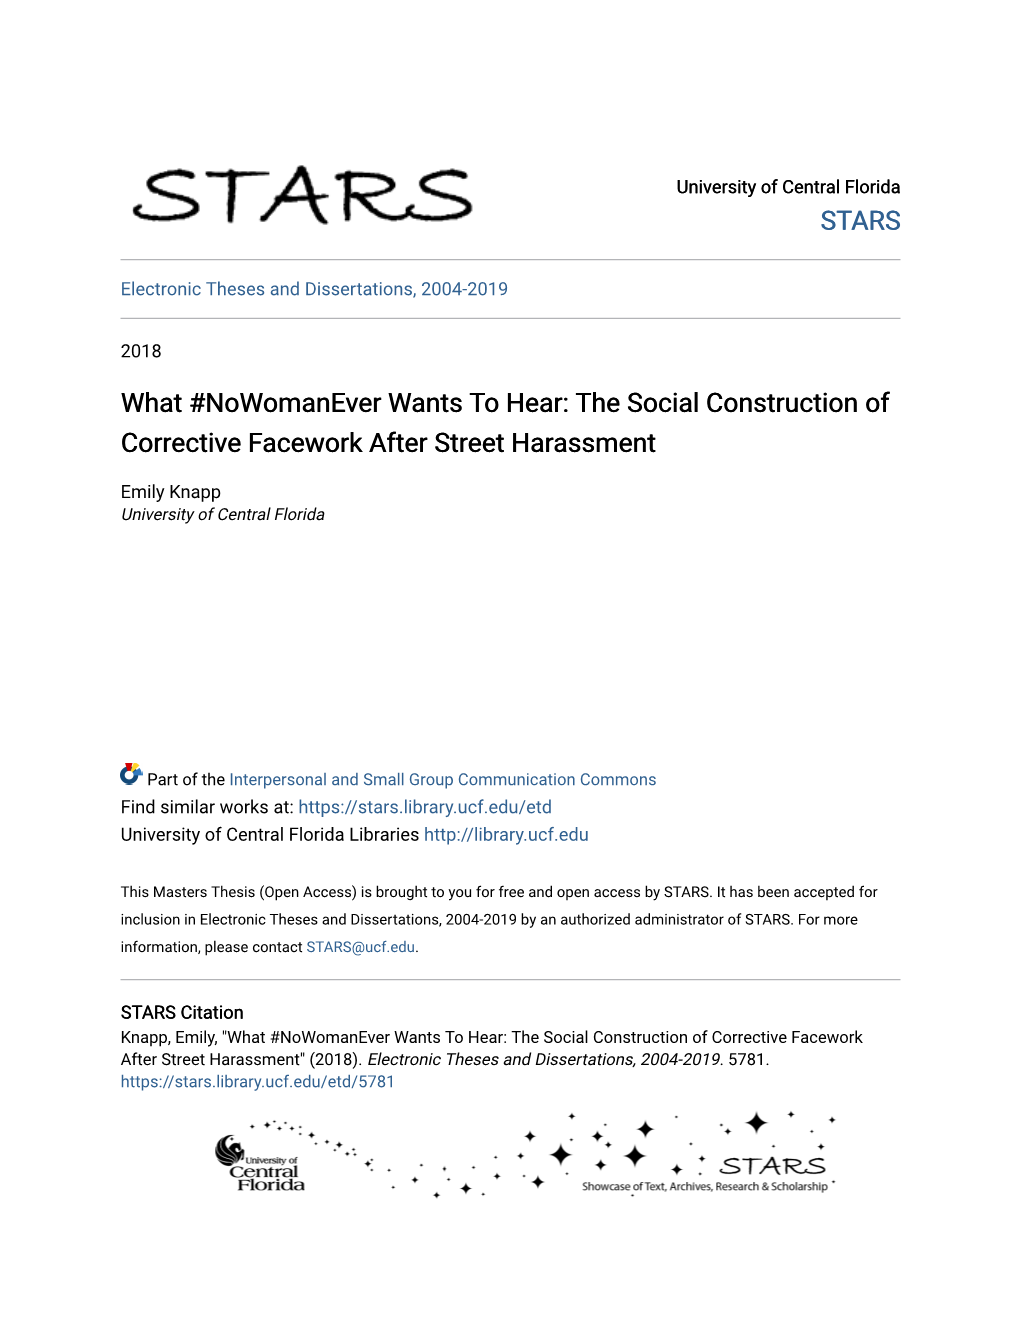 The Social Construction of Corrective Facework After Street Harassment